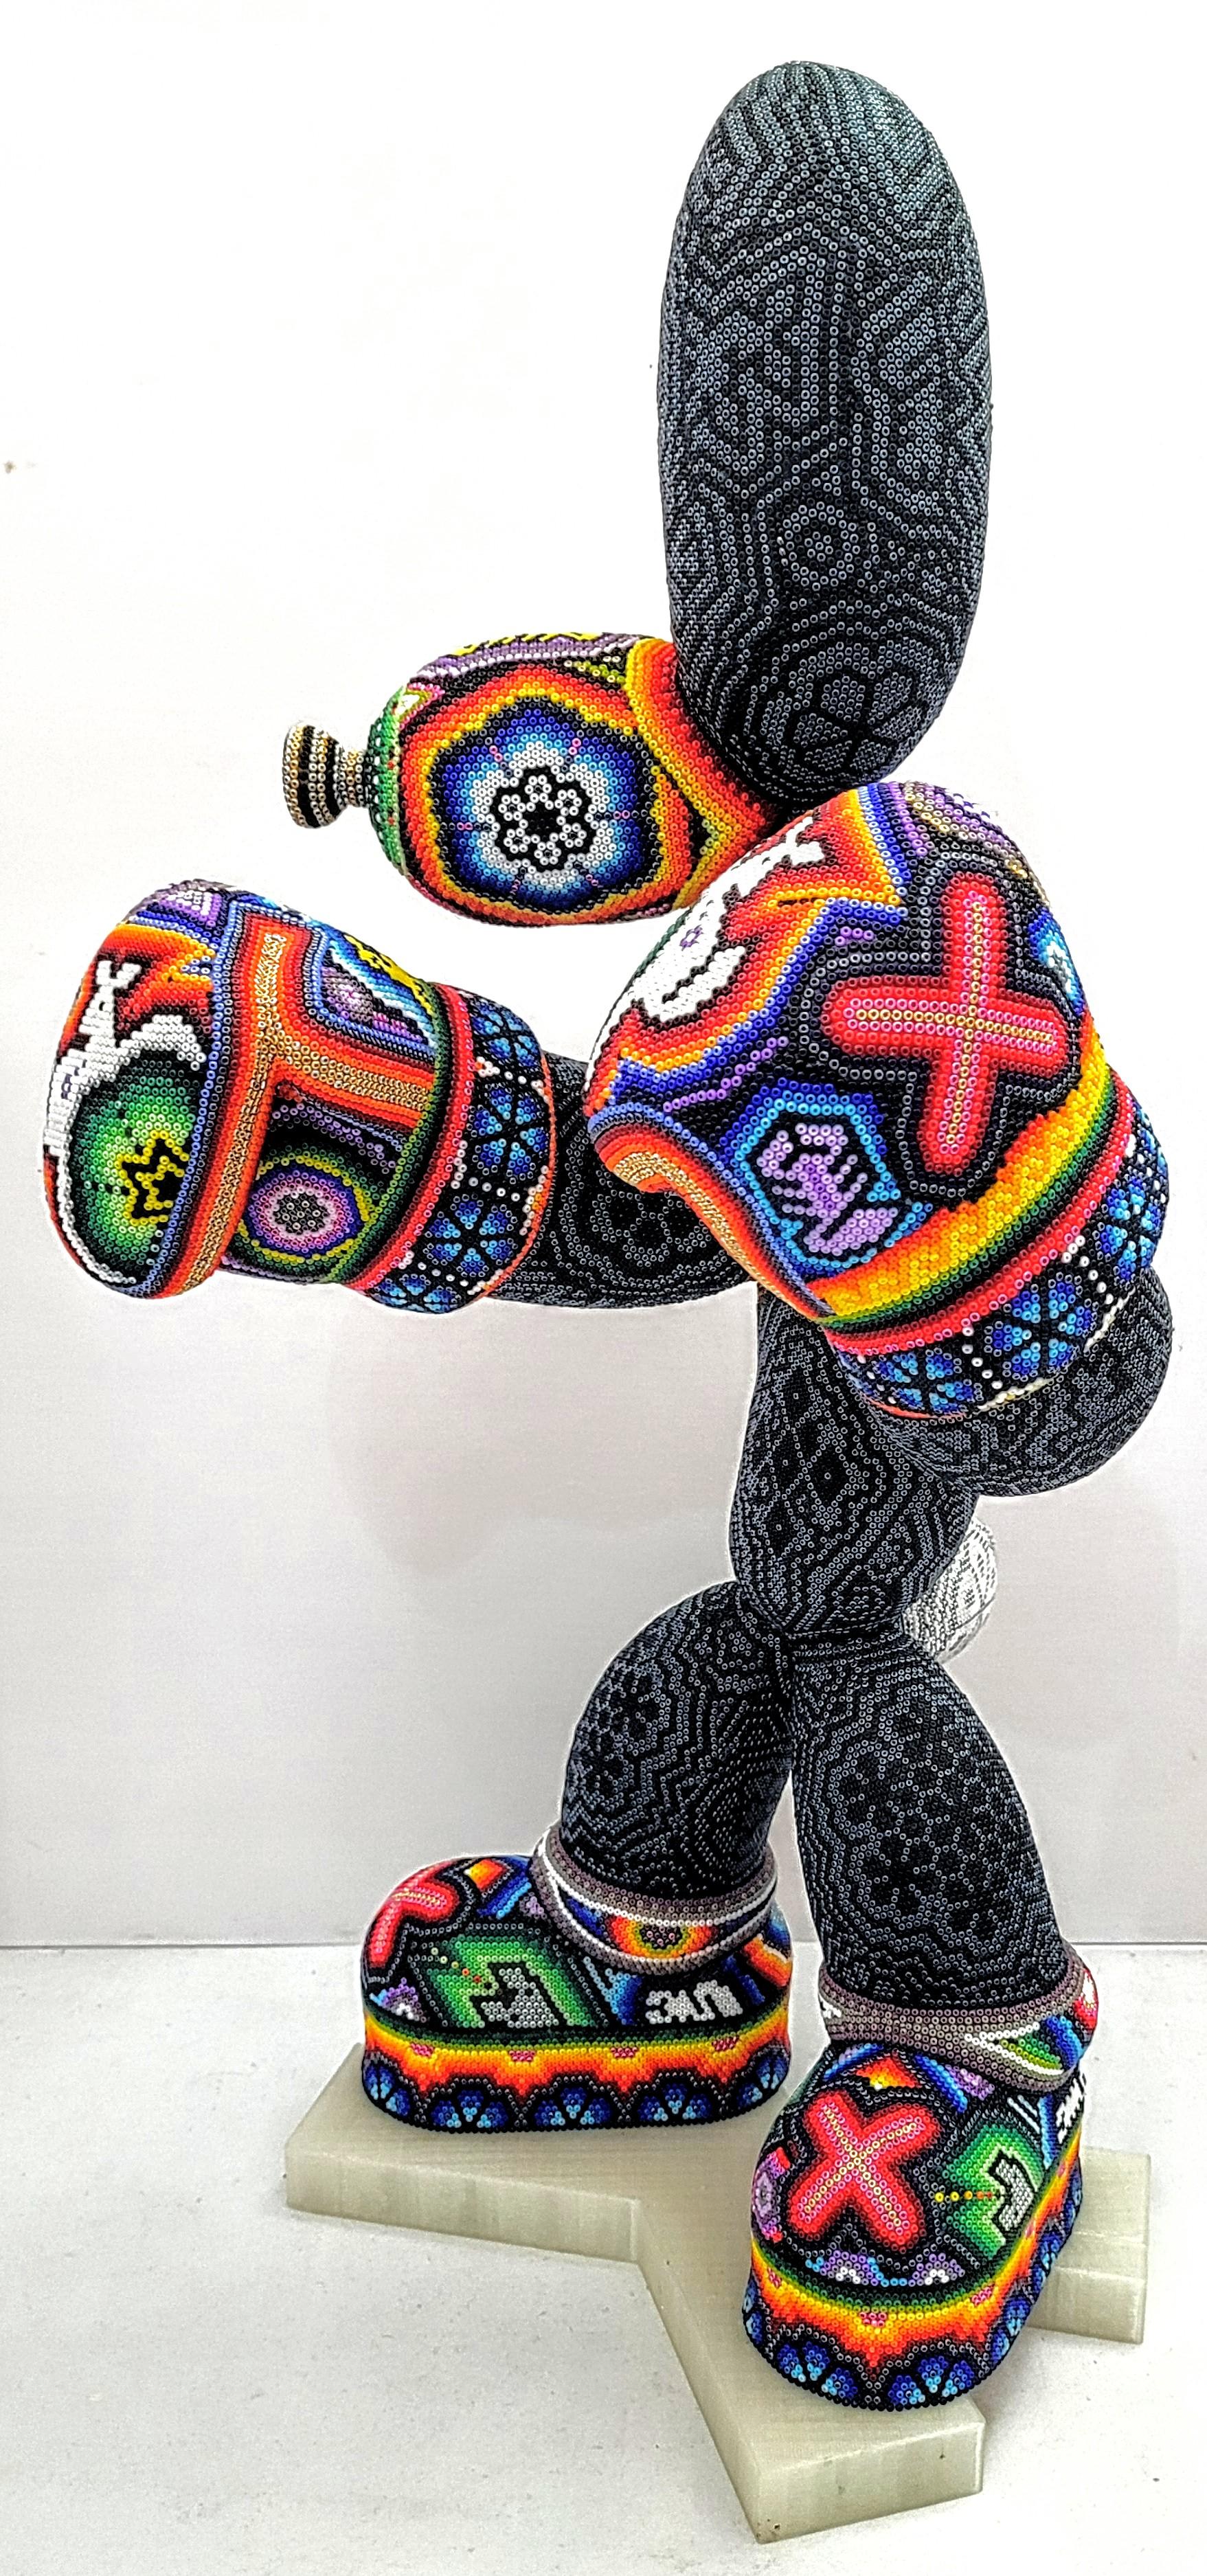 CHROMA aka Rick Wolfryd  Abstract Sculpture - "Boxer Boxing" from Huichol ALTERATIONS Series